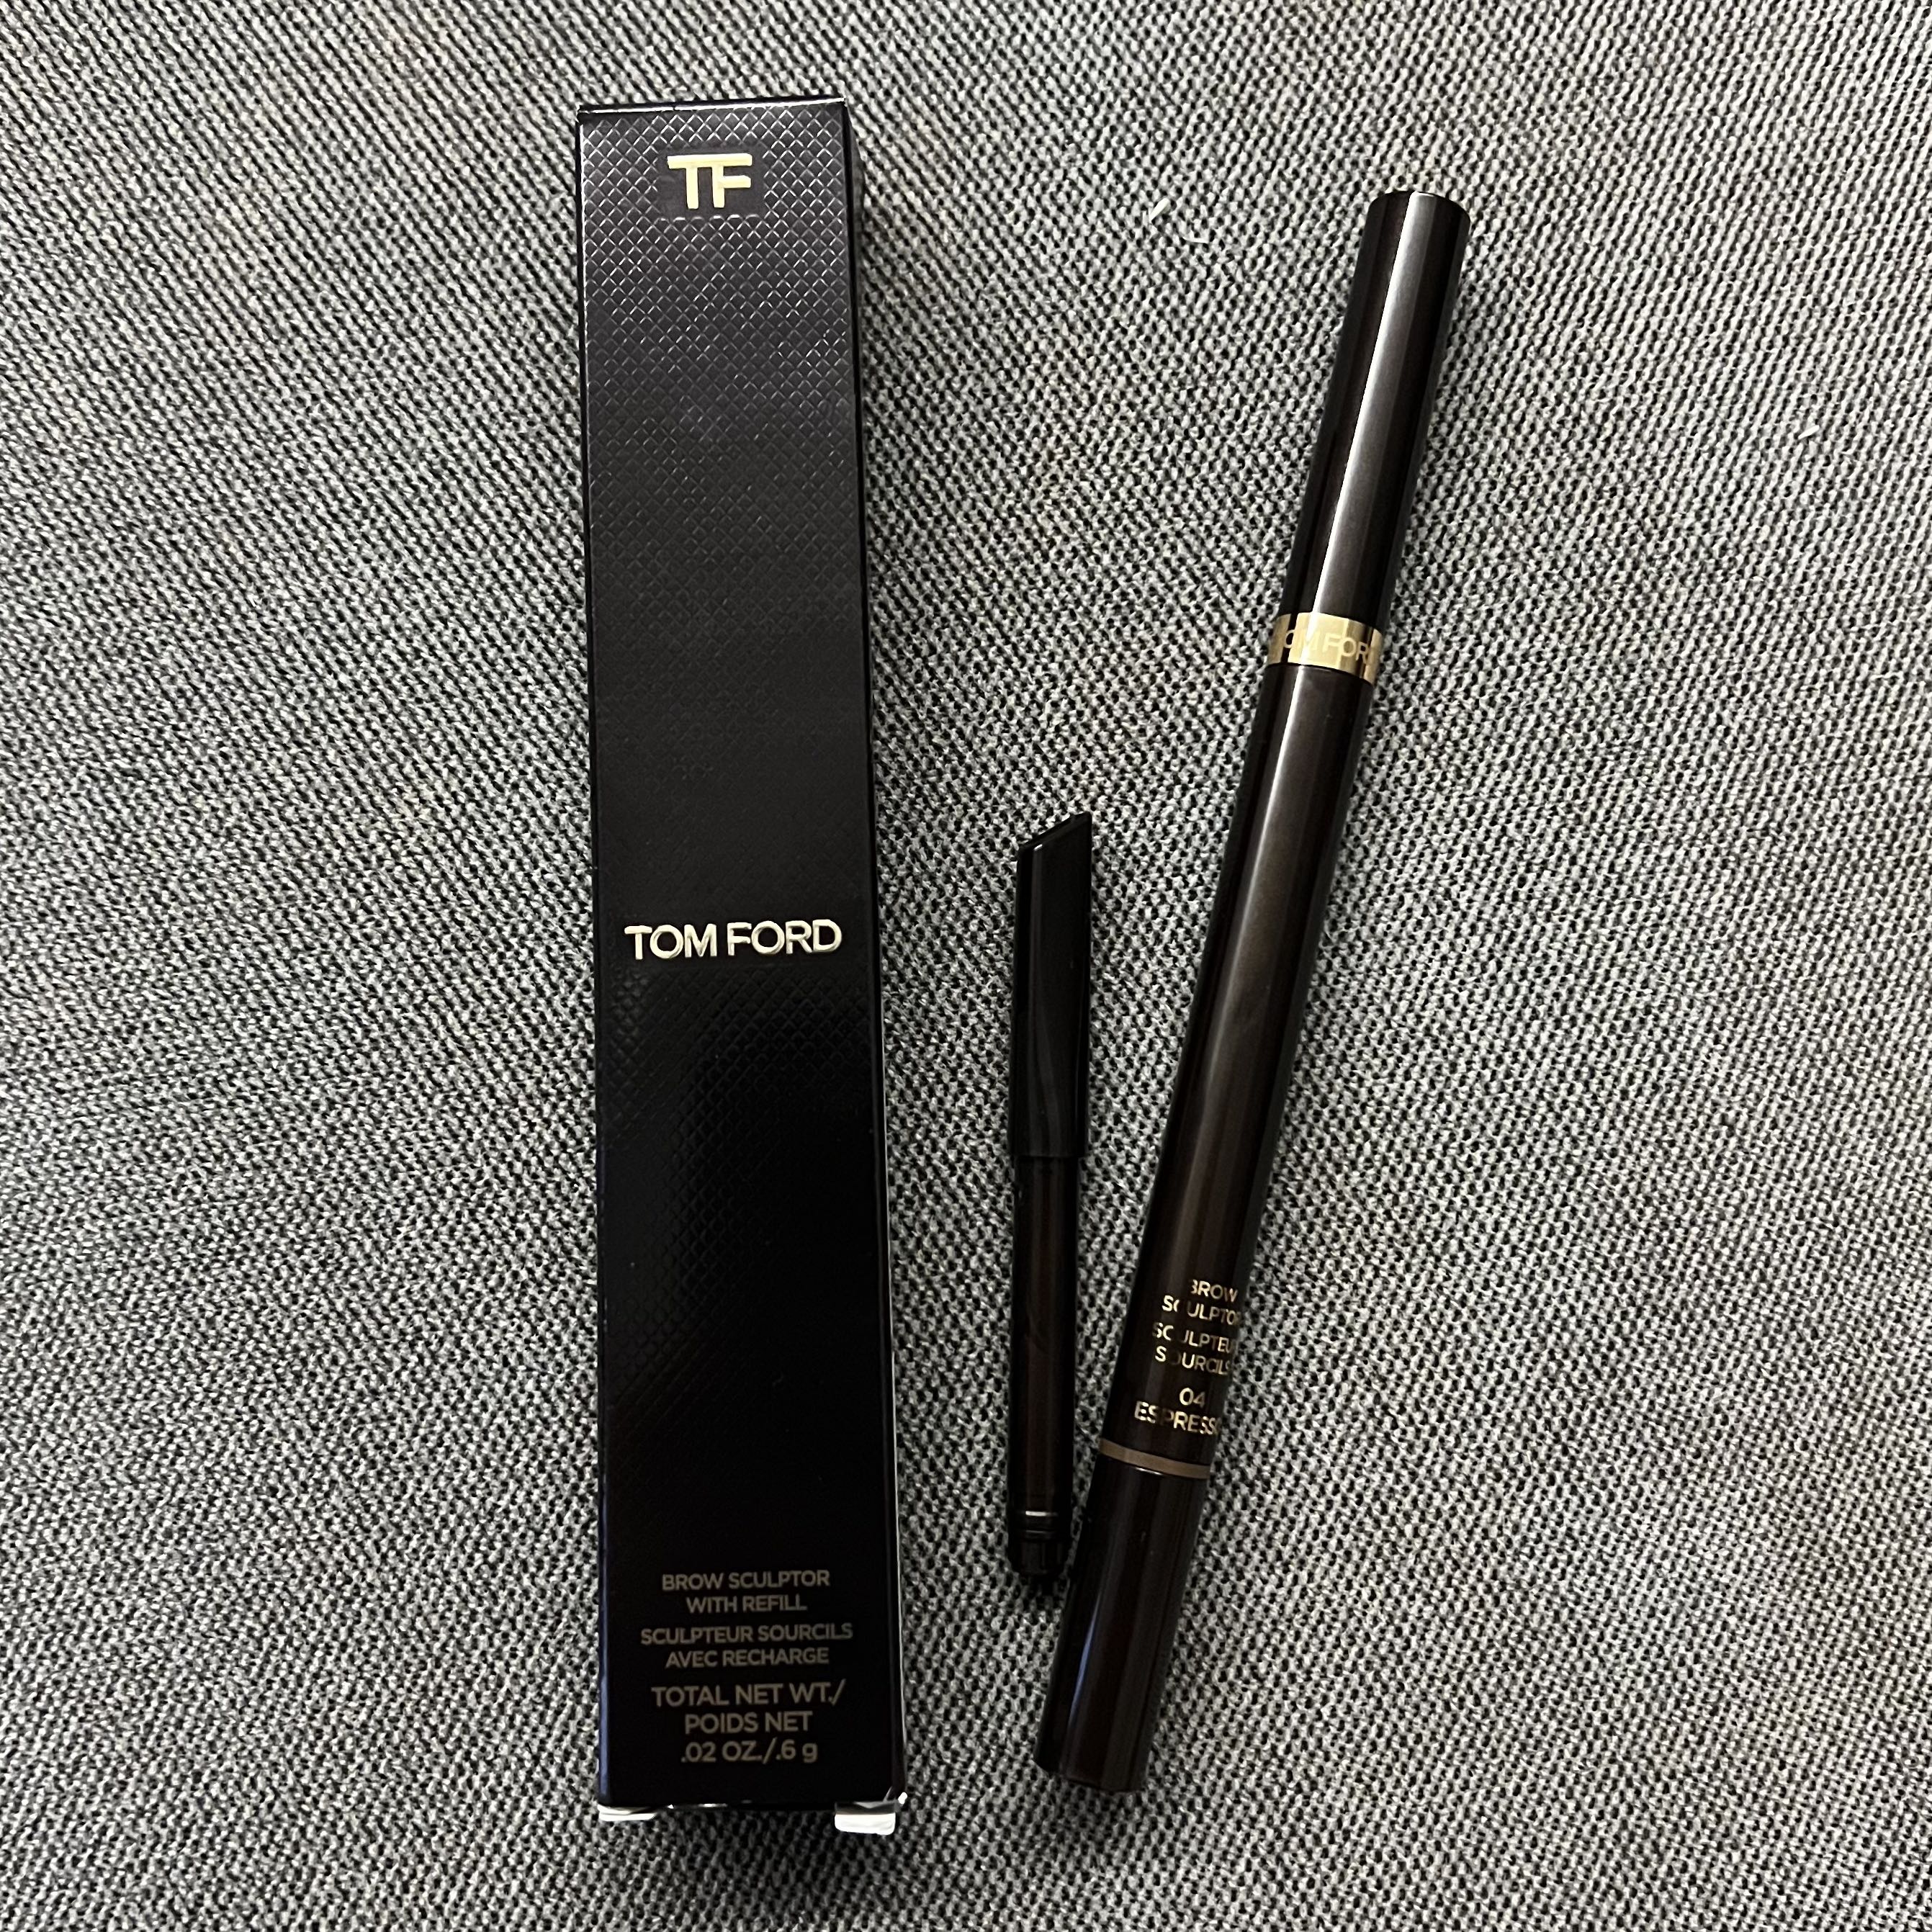 TOM FORD - Brow Sculptor with refill - 04 Espresso, Beauty & Personal Care,  Face, Makeup on Carousell